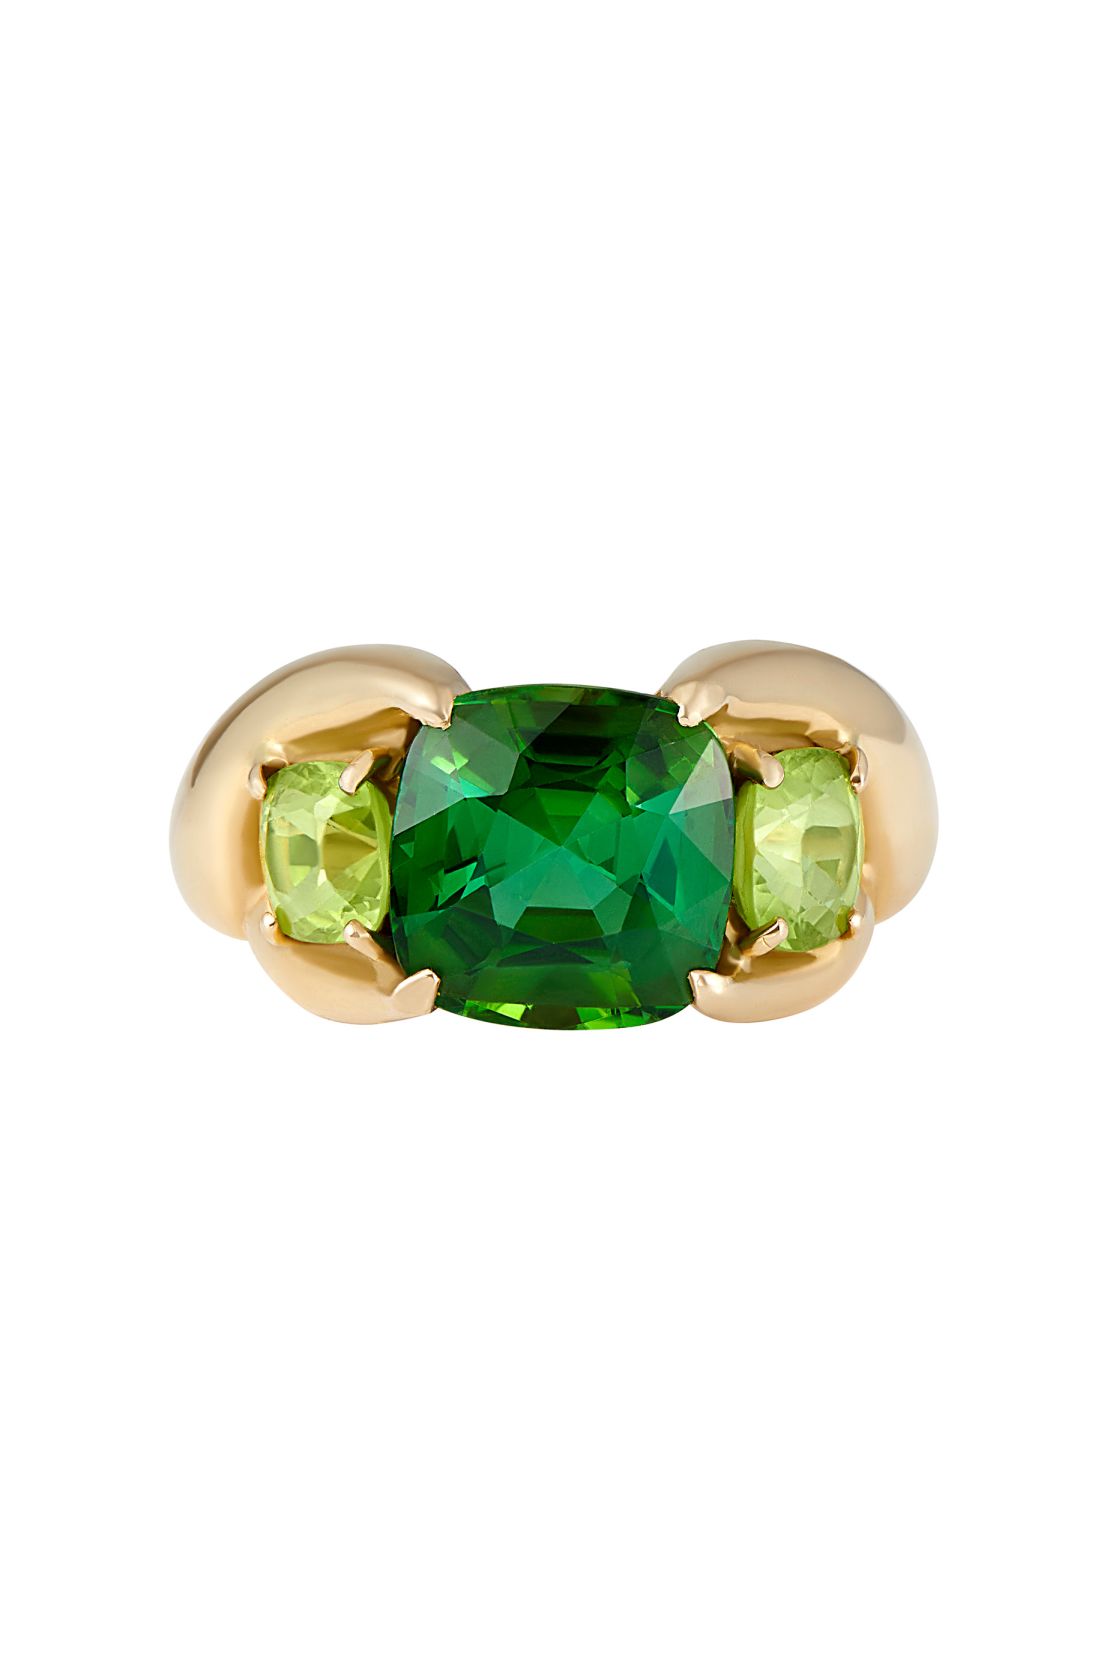 Ouroboros' "Lobsters for Life" ring in 18kt gold set with a bi-chrome cushion cut Afghan tourmaline and cushion cut Burmese peridots (price on application).